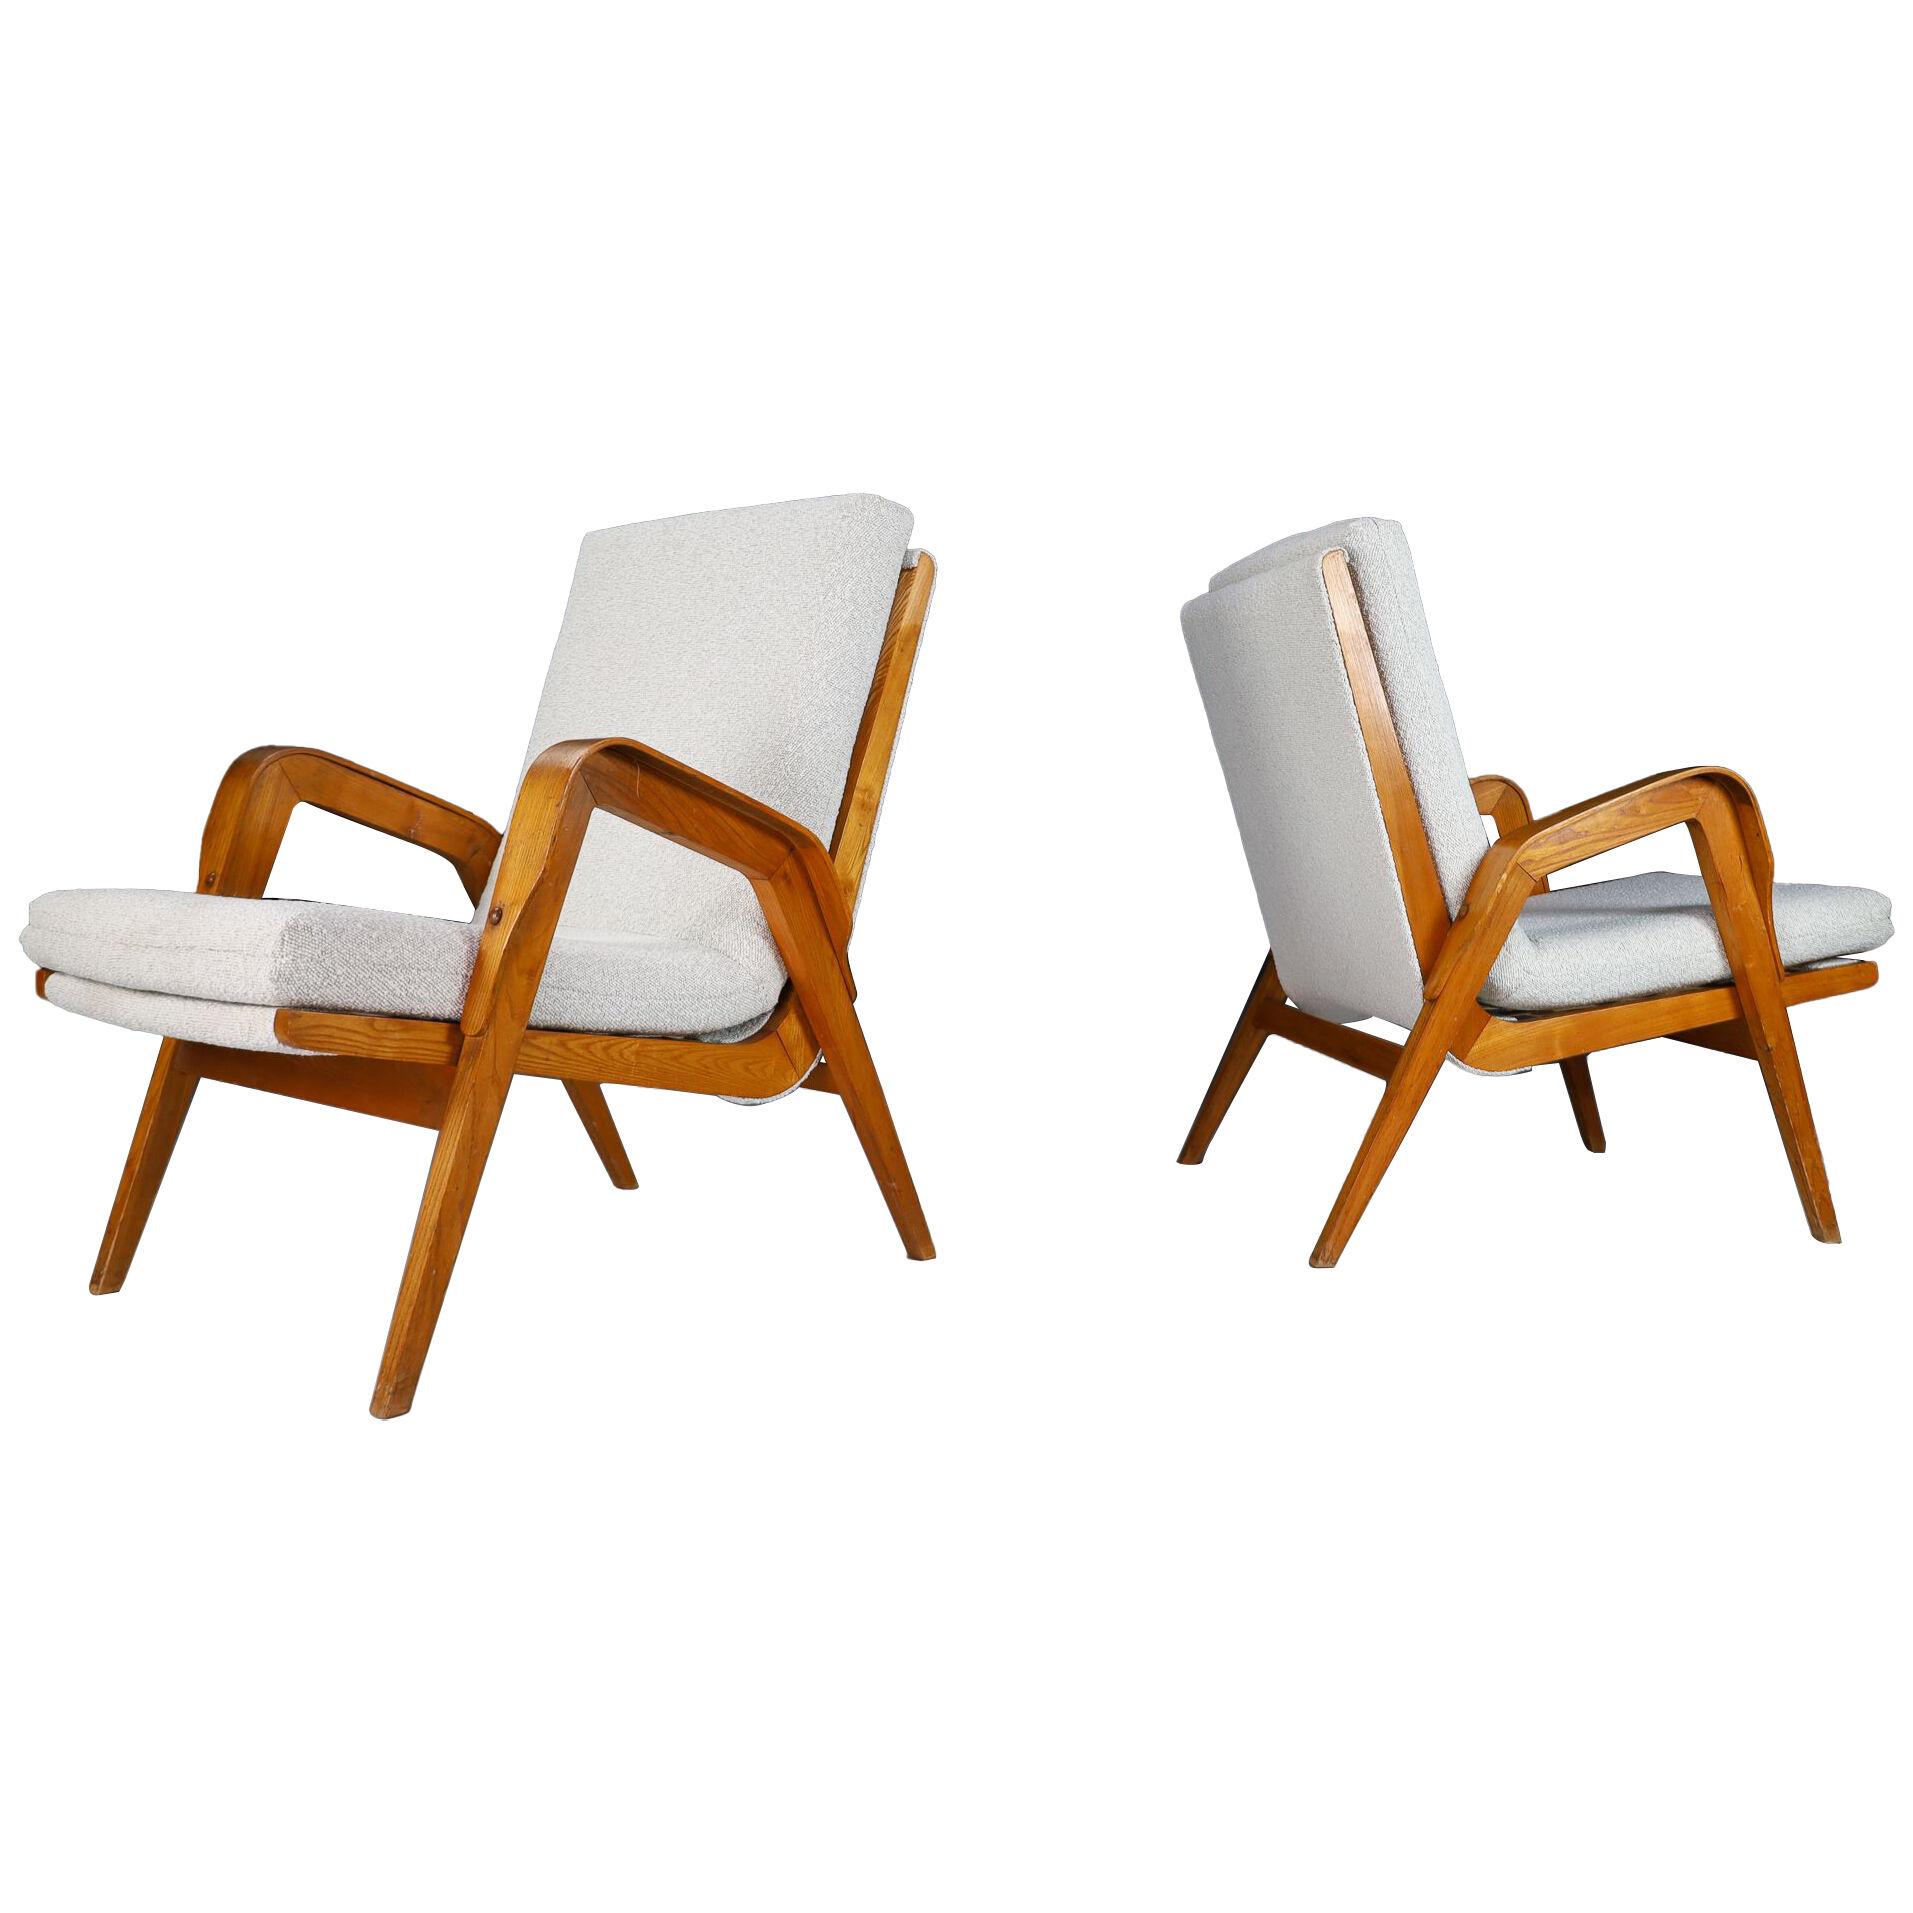 Sculptural Ash Lounge Chairs Reupholstered in Bouclé Fabric Praque 1940s